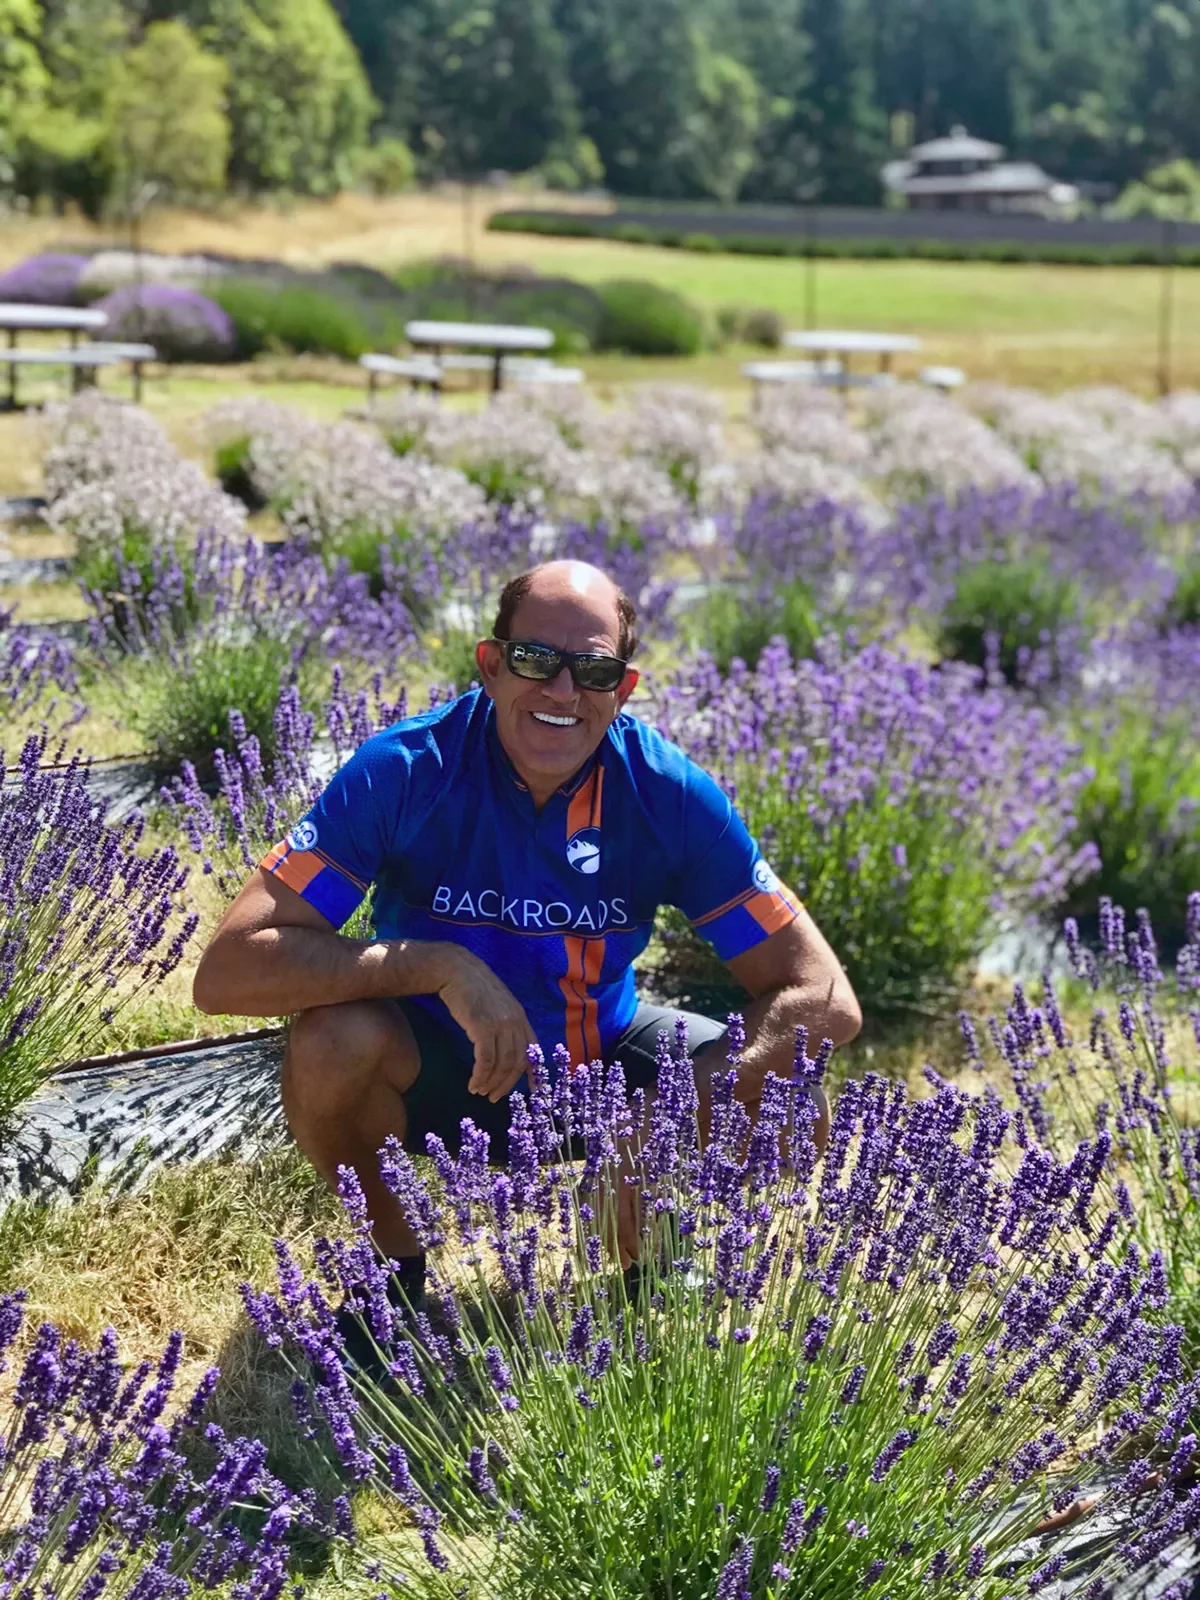 Guest crouching among field of lavender bushes.